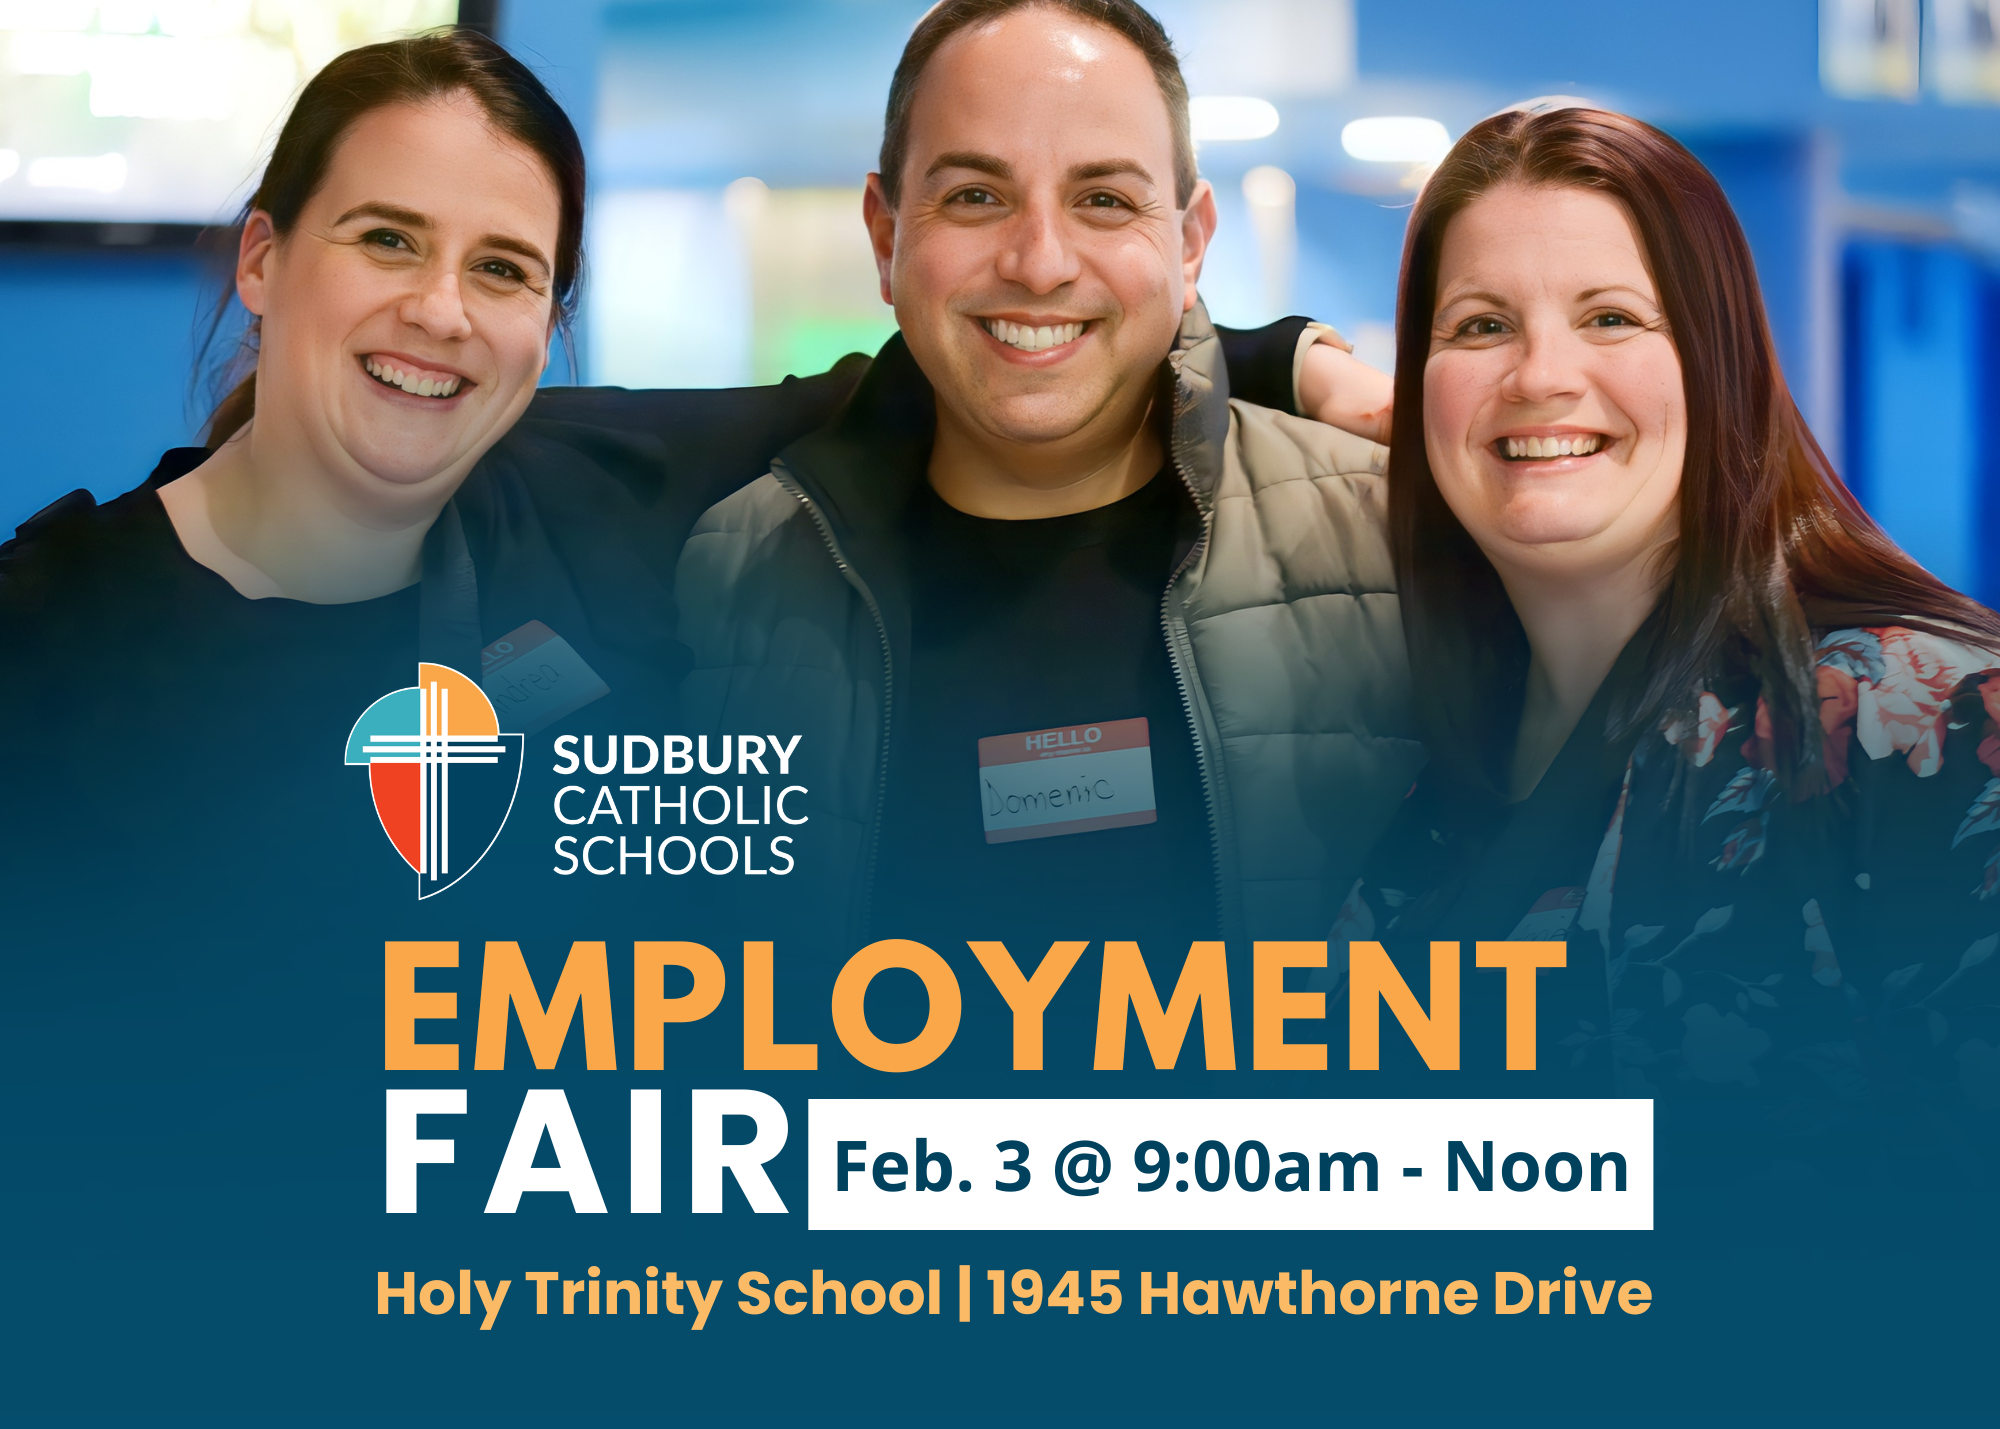 Join Us For Our Employment Fair On Feb. 3